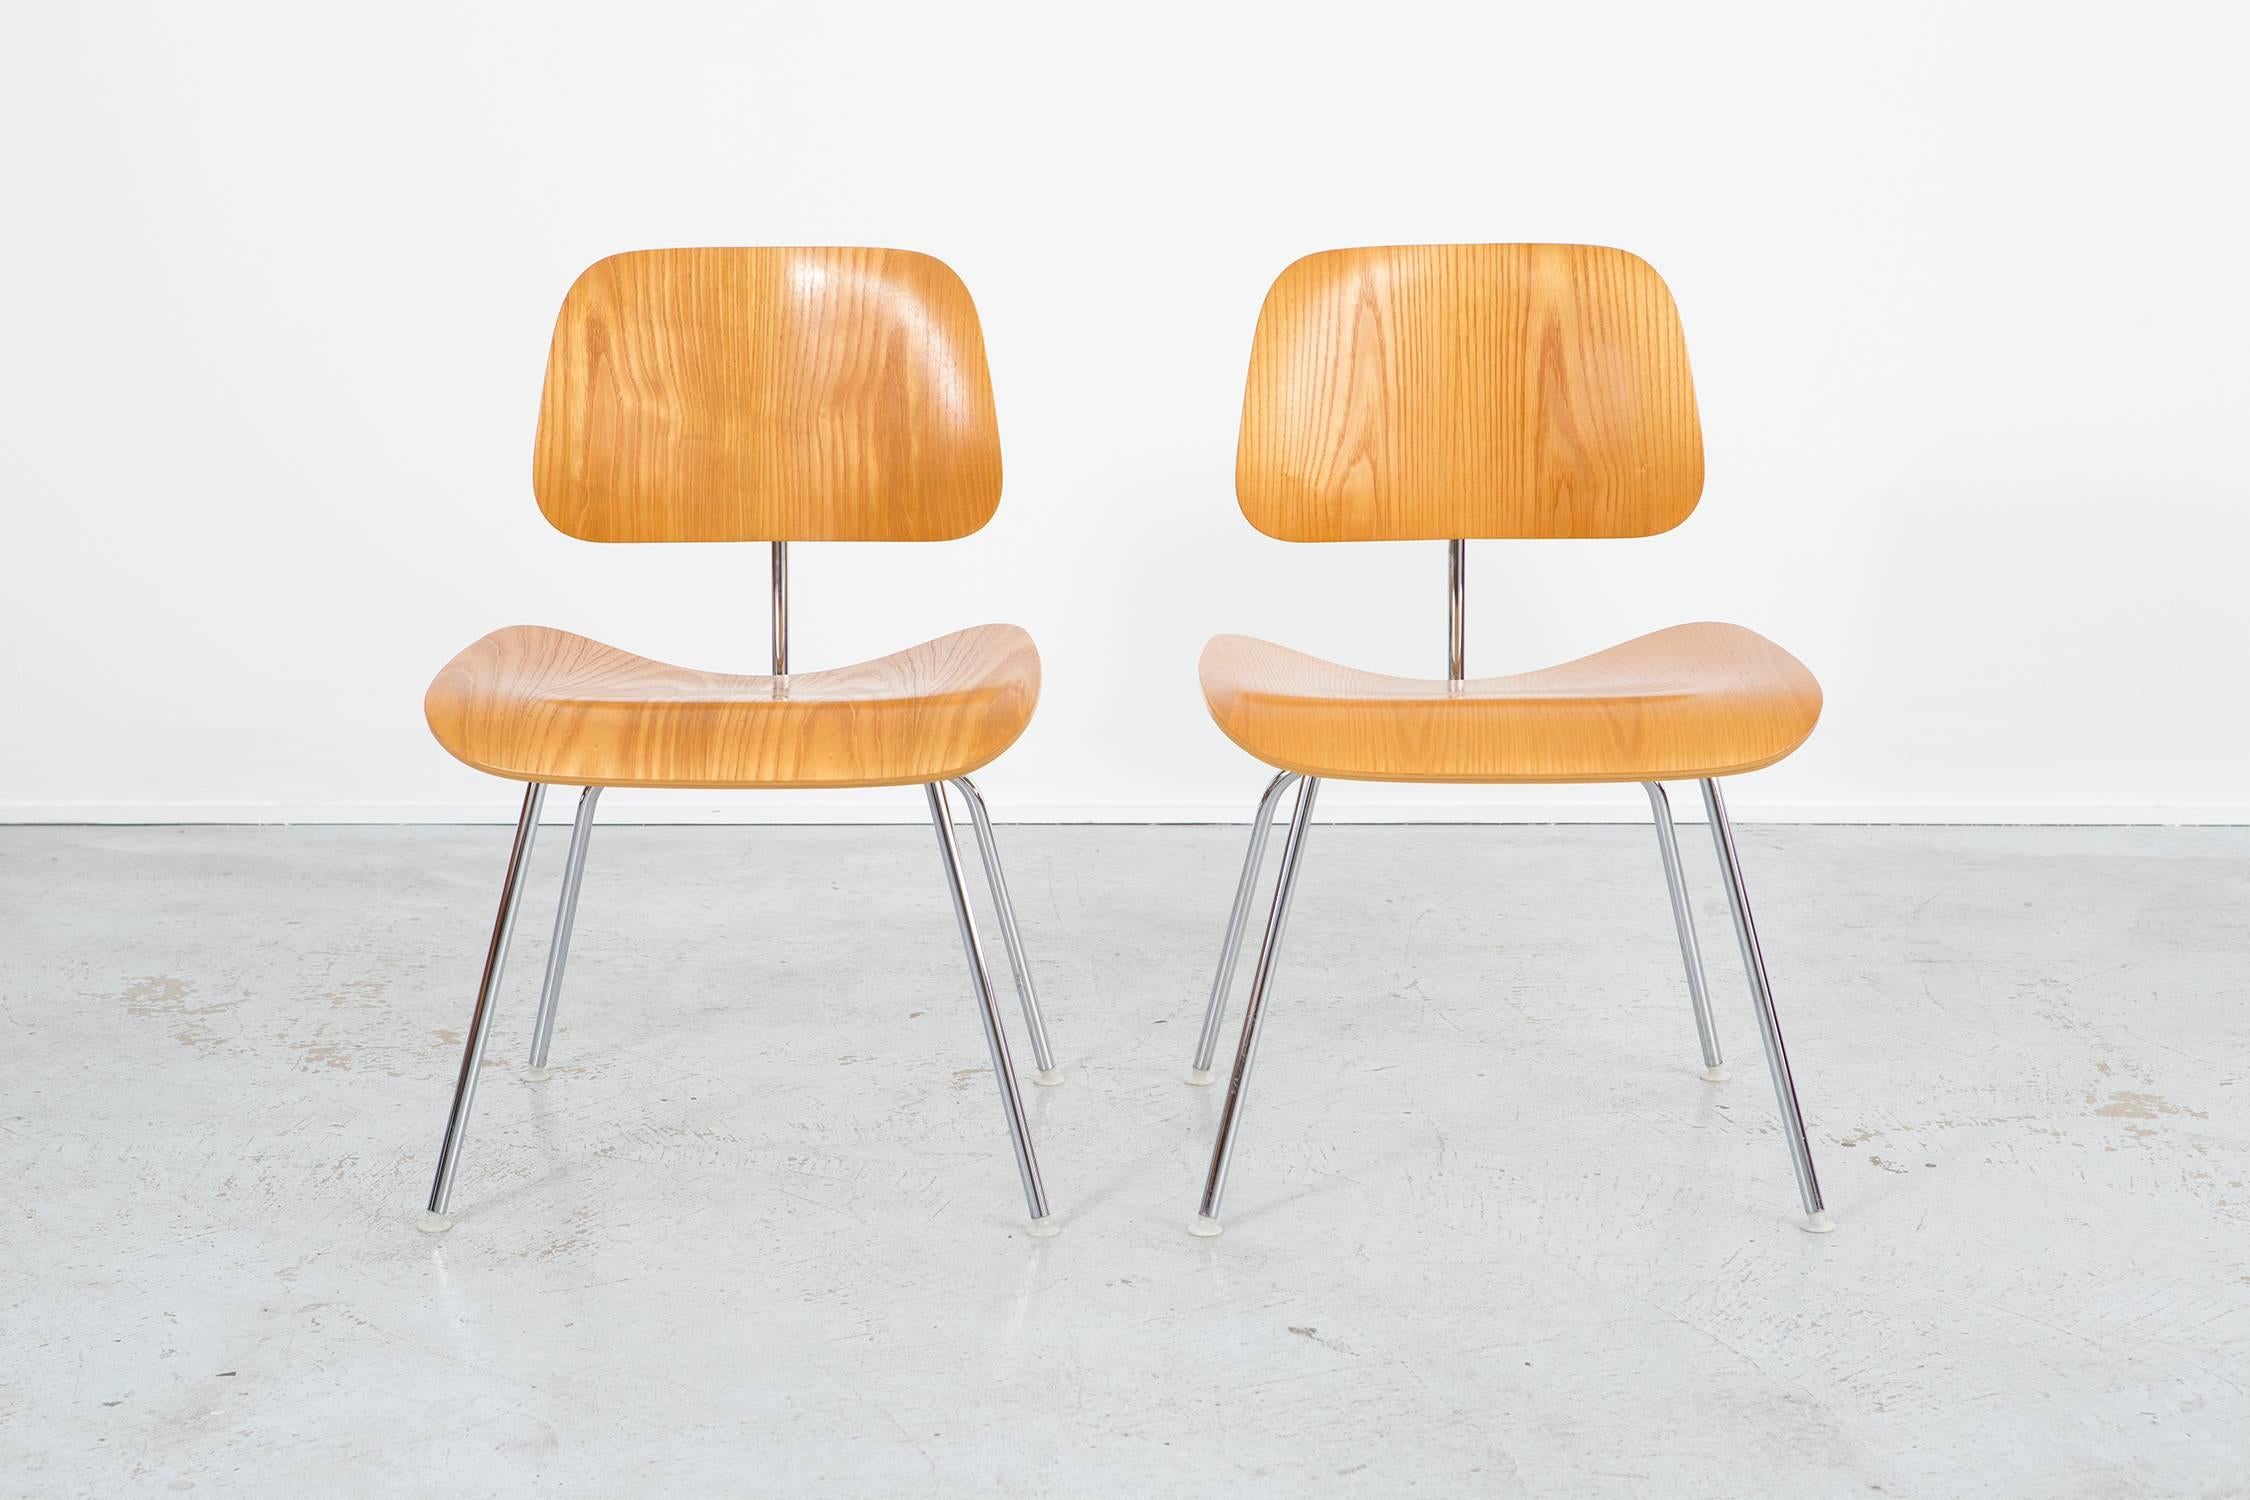 Set of four DCM chairs

designed by Charles + Ray Eames for Herman Miller

USA, d 1946, circa 1970s

wood + metal

Measures: 29 ½